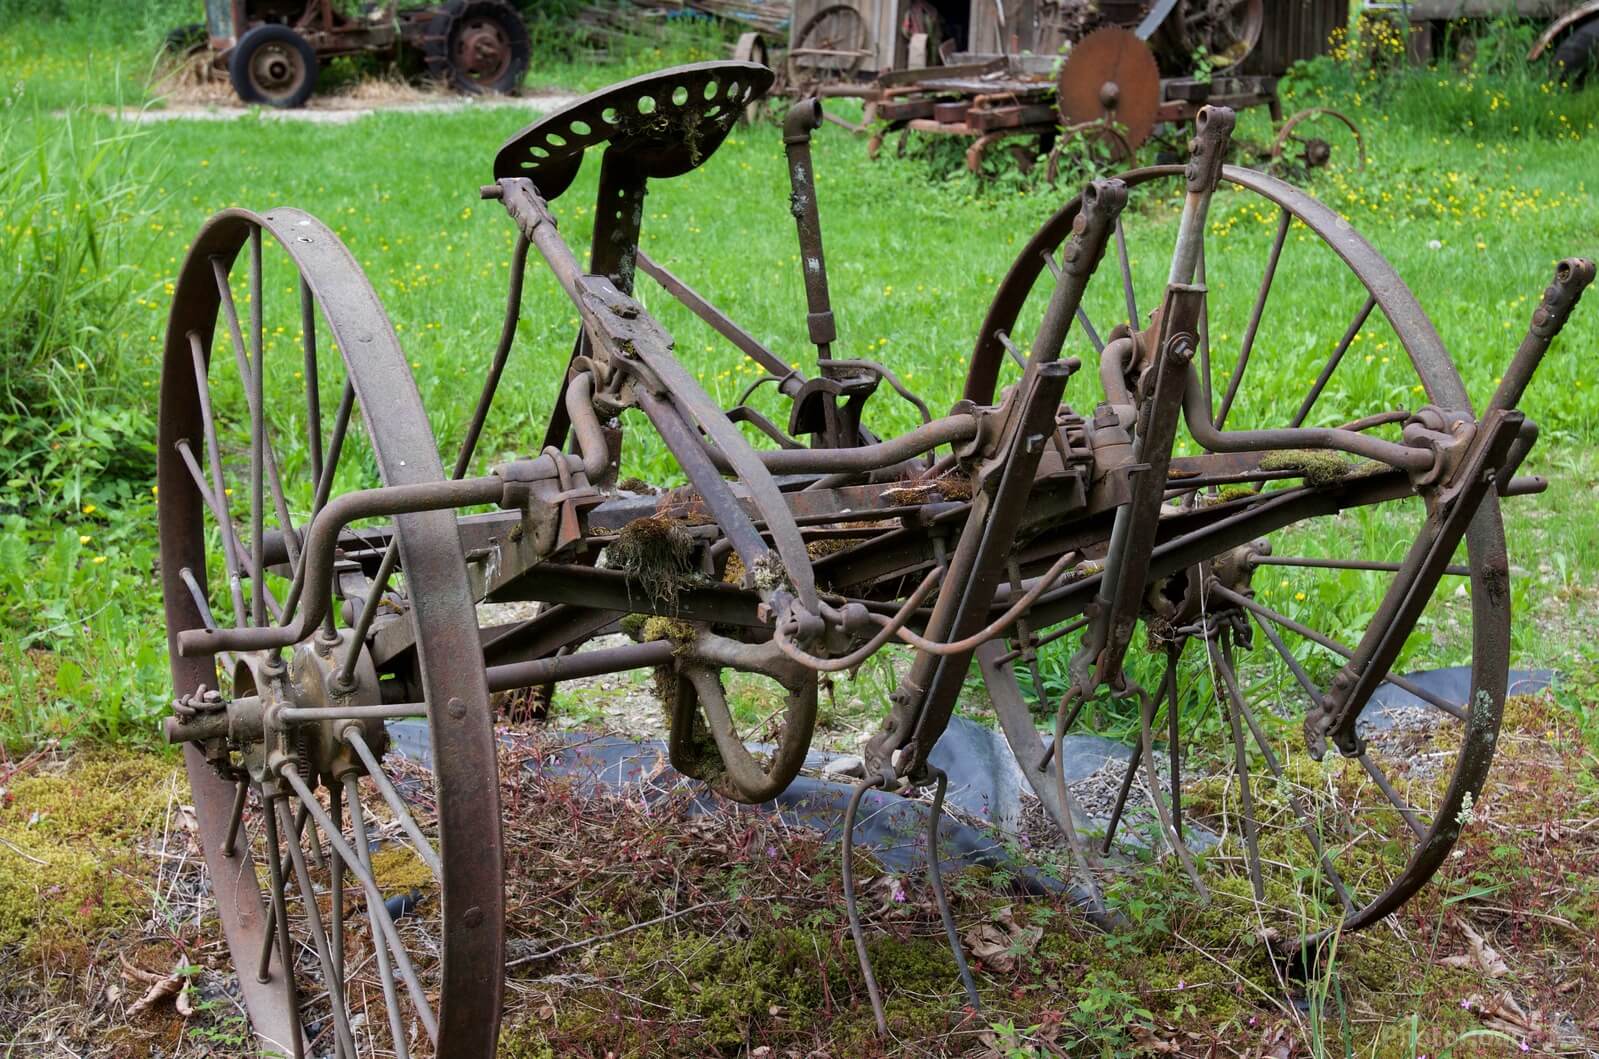 Image of Old Car and Farm Implement Collection by Steve West